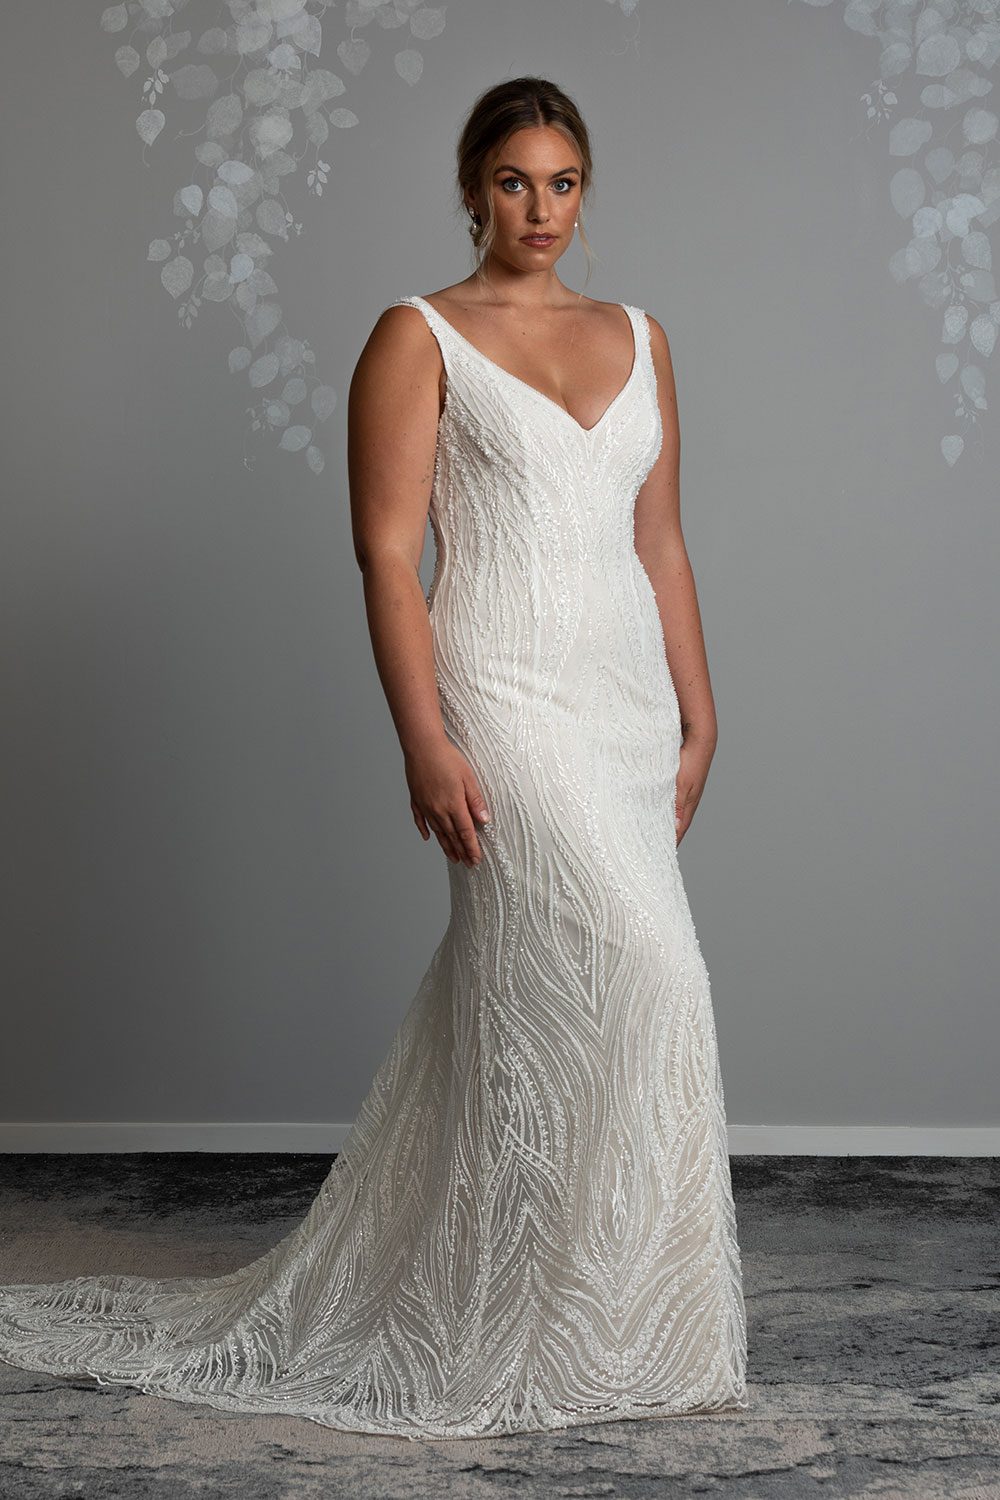 Kiera Wedding Dress from Vinka Design. Beautifully beaded lace wedding dress. Deep V-neckline both front and back is complemented with delicate sheer lace shoulder detail & structured bodice. Model showing front of the dress with deep V-neckline and beaded ivory lace over a champagne base